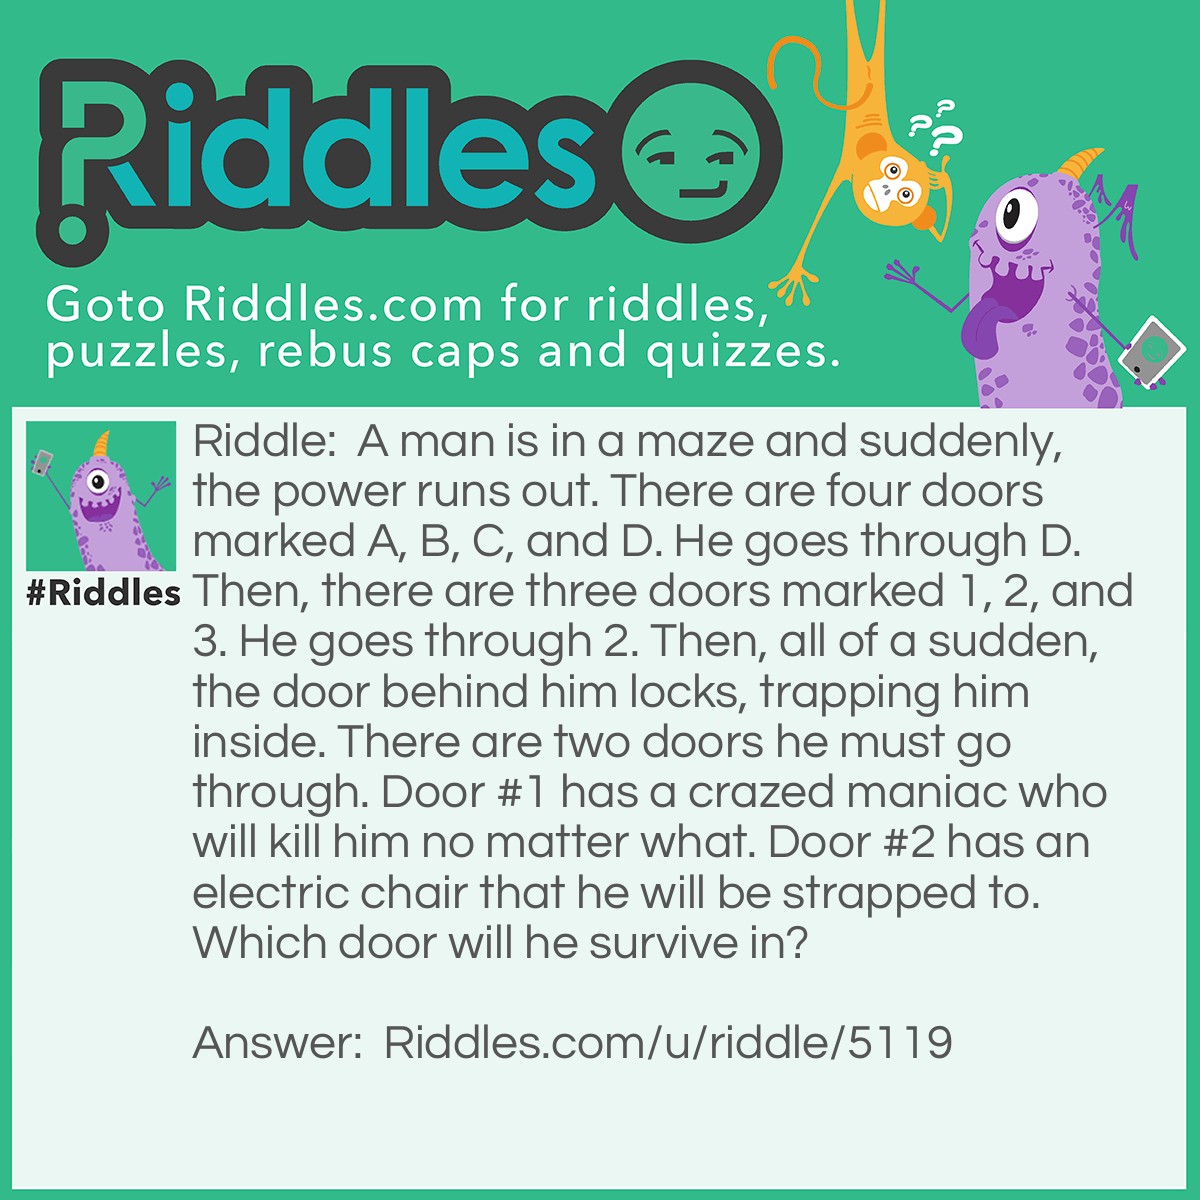 Riddle: A man is in a maze and suddenly, the power runs out. There are four doors marked A, B, C, and D. He goes through D. Then, there are three doors marked 1, 2, and 3. He goes through 2. Then, all of a sudden, the door behind him locks, trapping him inside. There are two doors he must go through. Door #1 has a crazed maniac who will kill him no matter what. Door #2 has an electric chair that he will be strapped to. Which door will he survive in? Answer: Door #2. You remember how the power ran out?